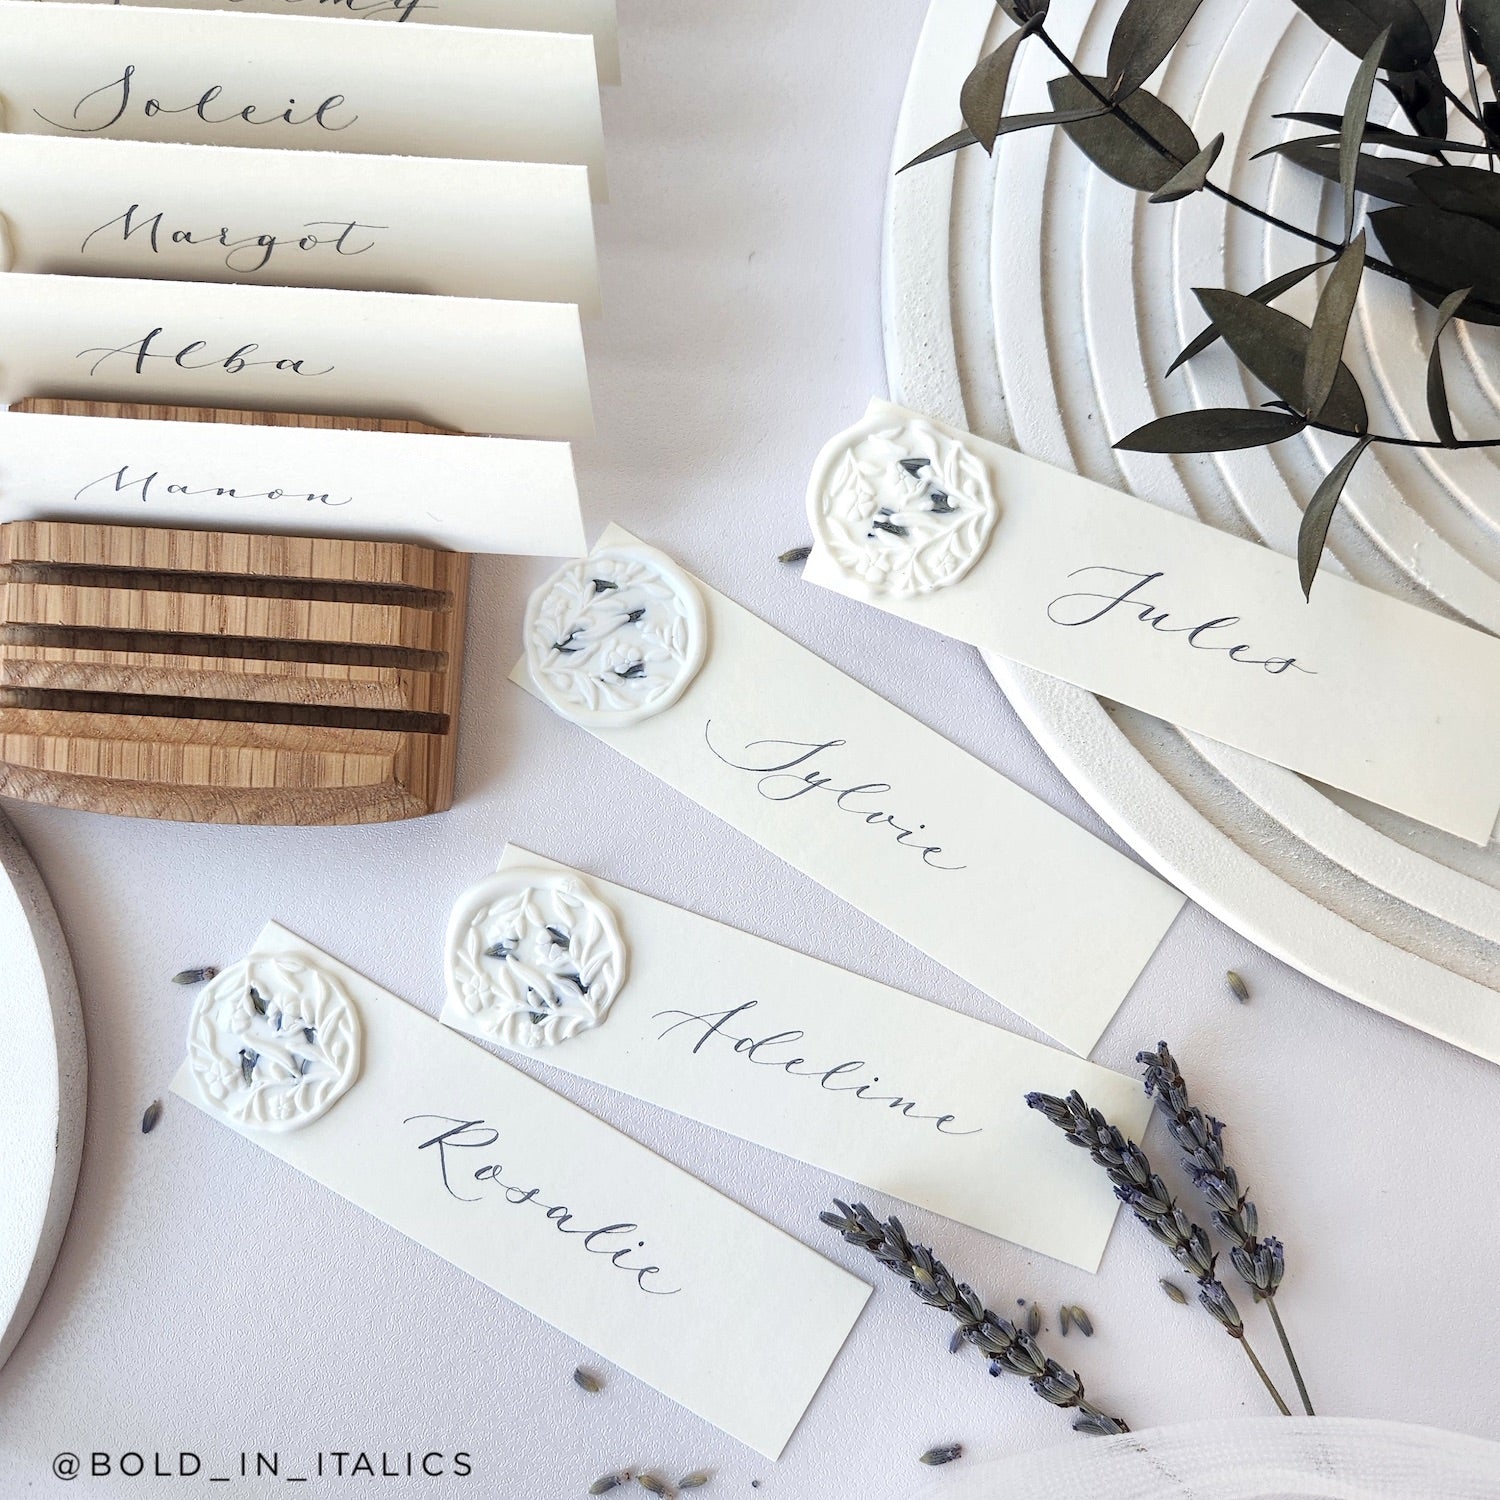 ivory lessebo wedding place cards with wax seal